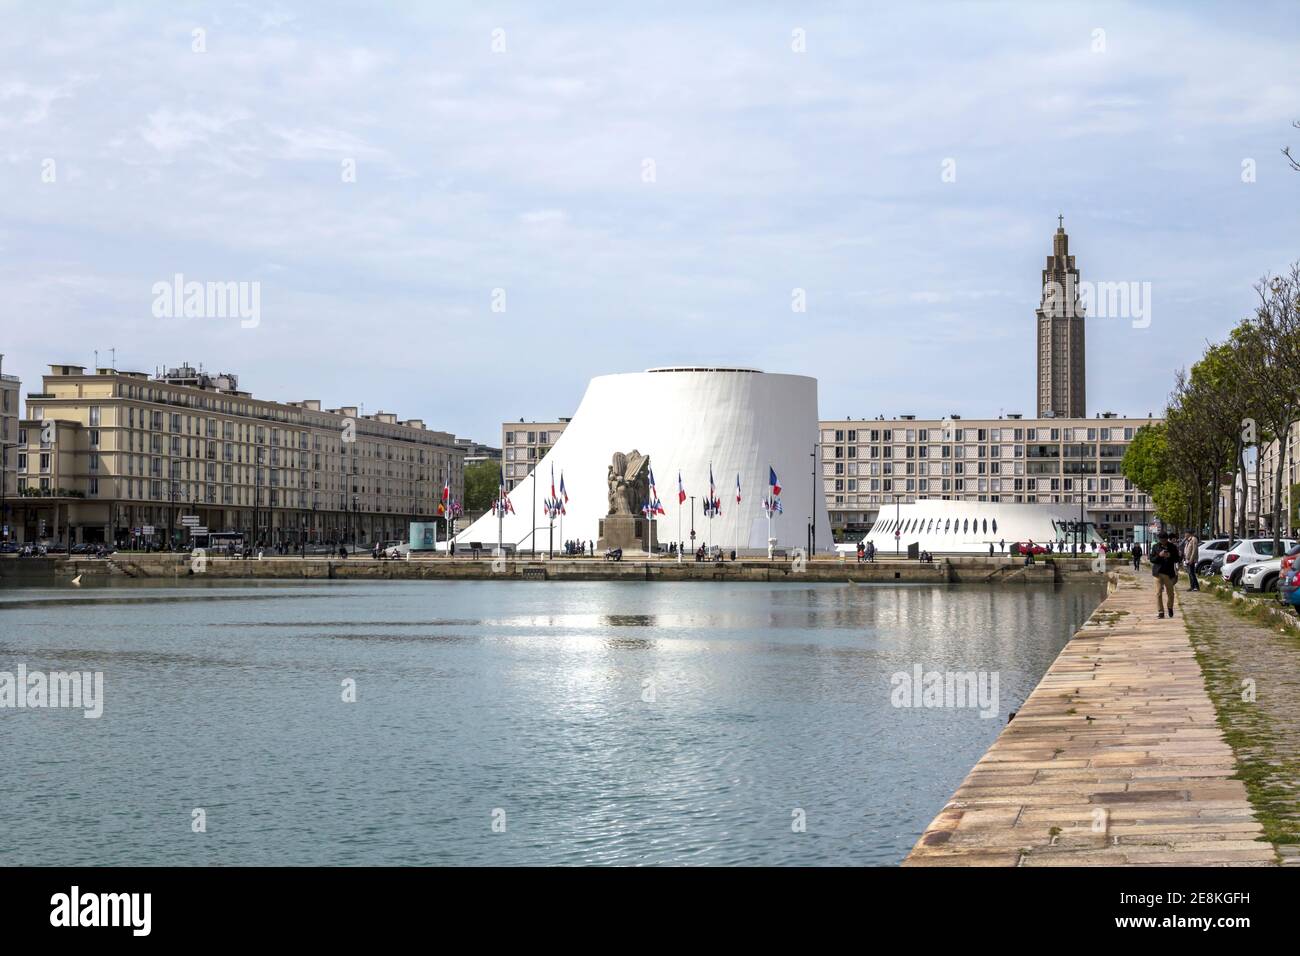 Le Havre, France : Le Volcan, a cultural complex comprising a concert hall and a library. Le Havre was rebuilt after being completely destroyed in Wor Stock Photo